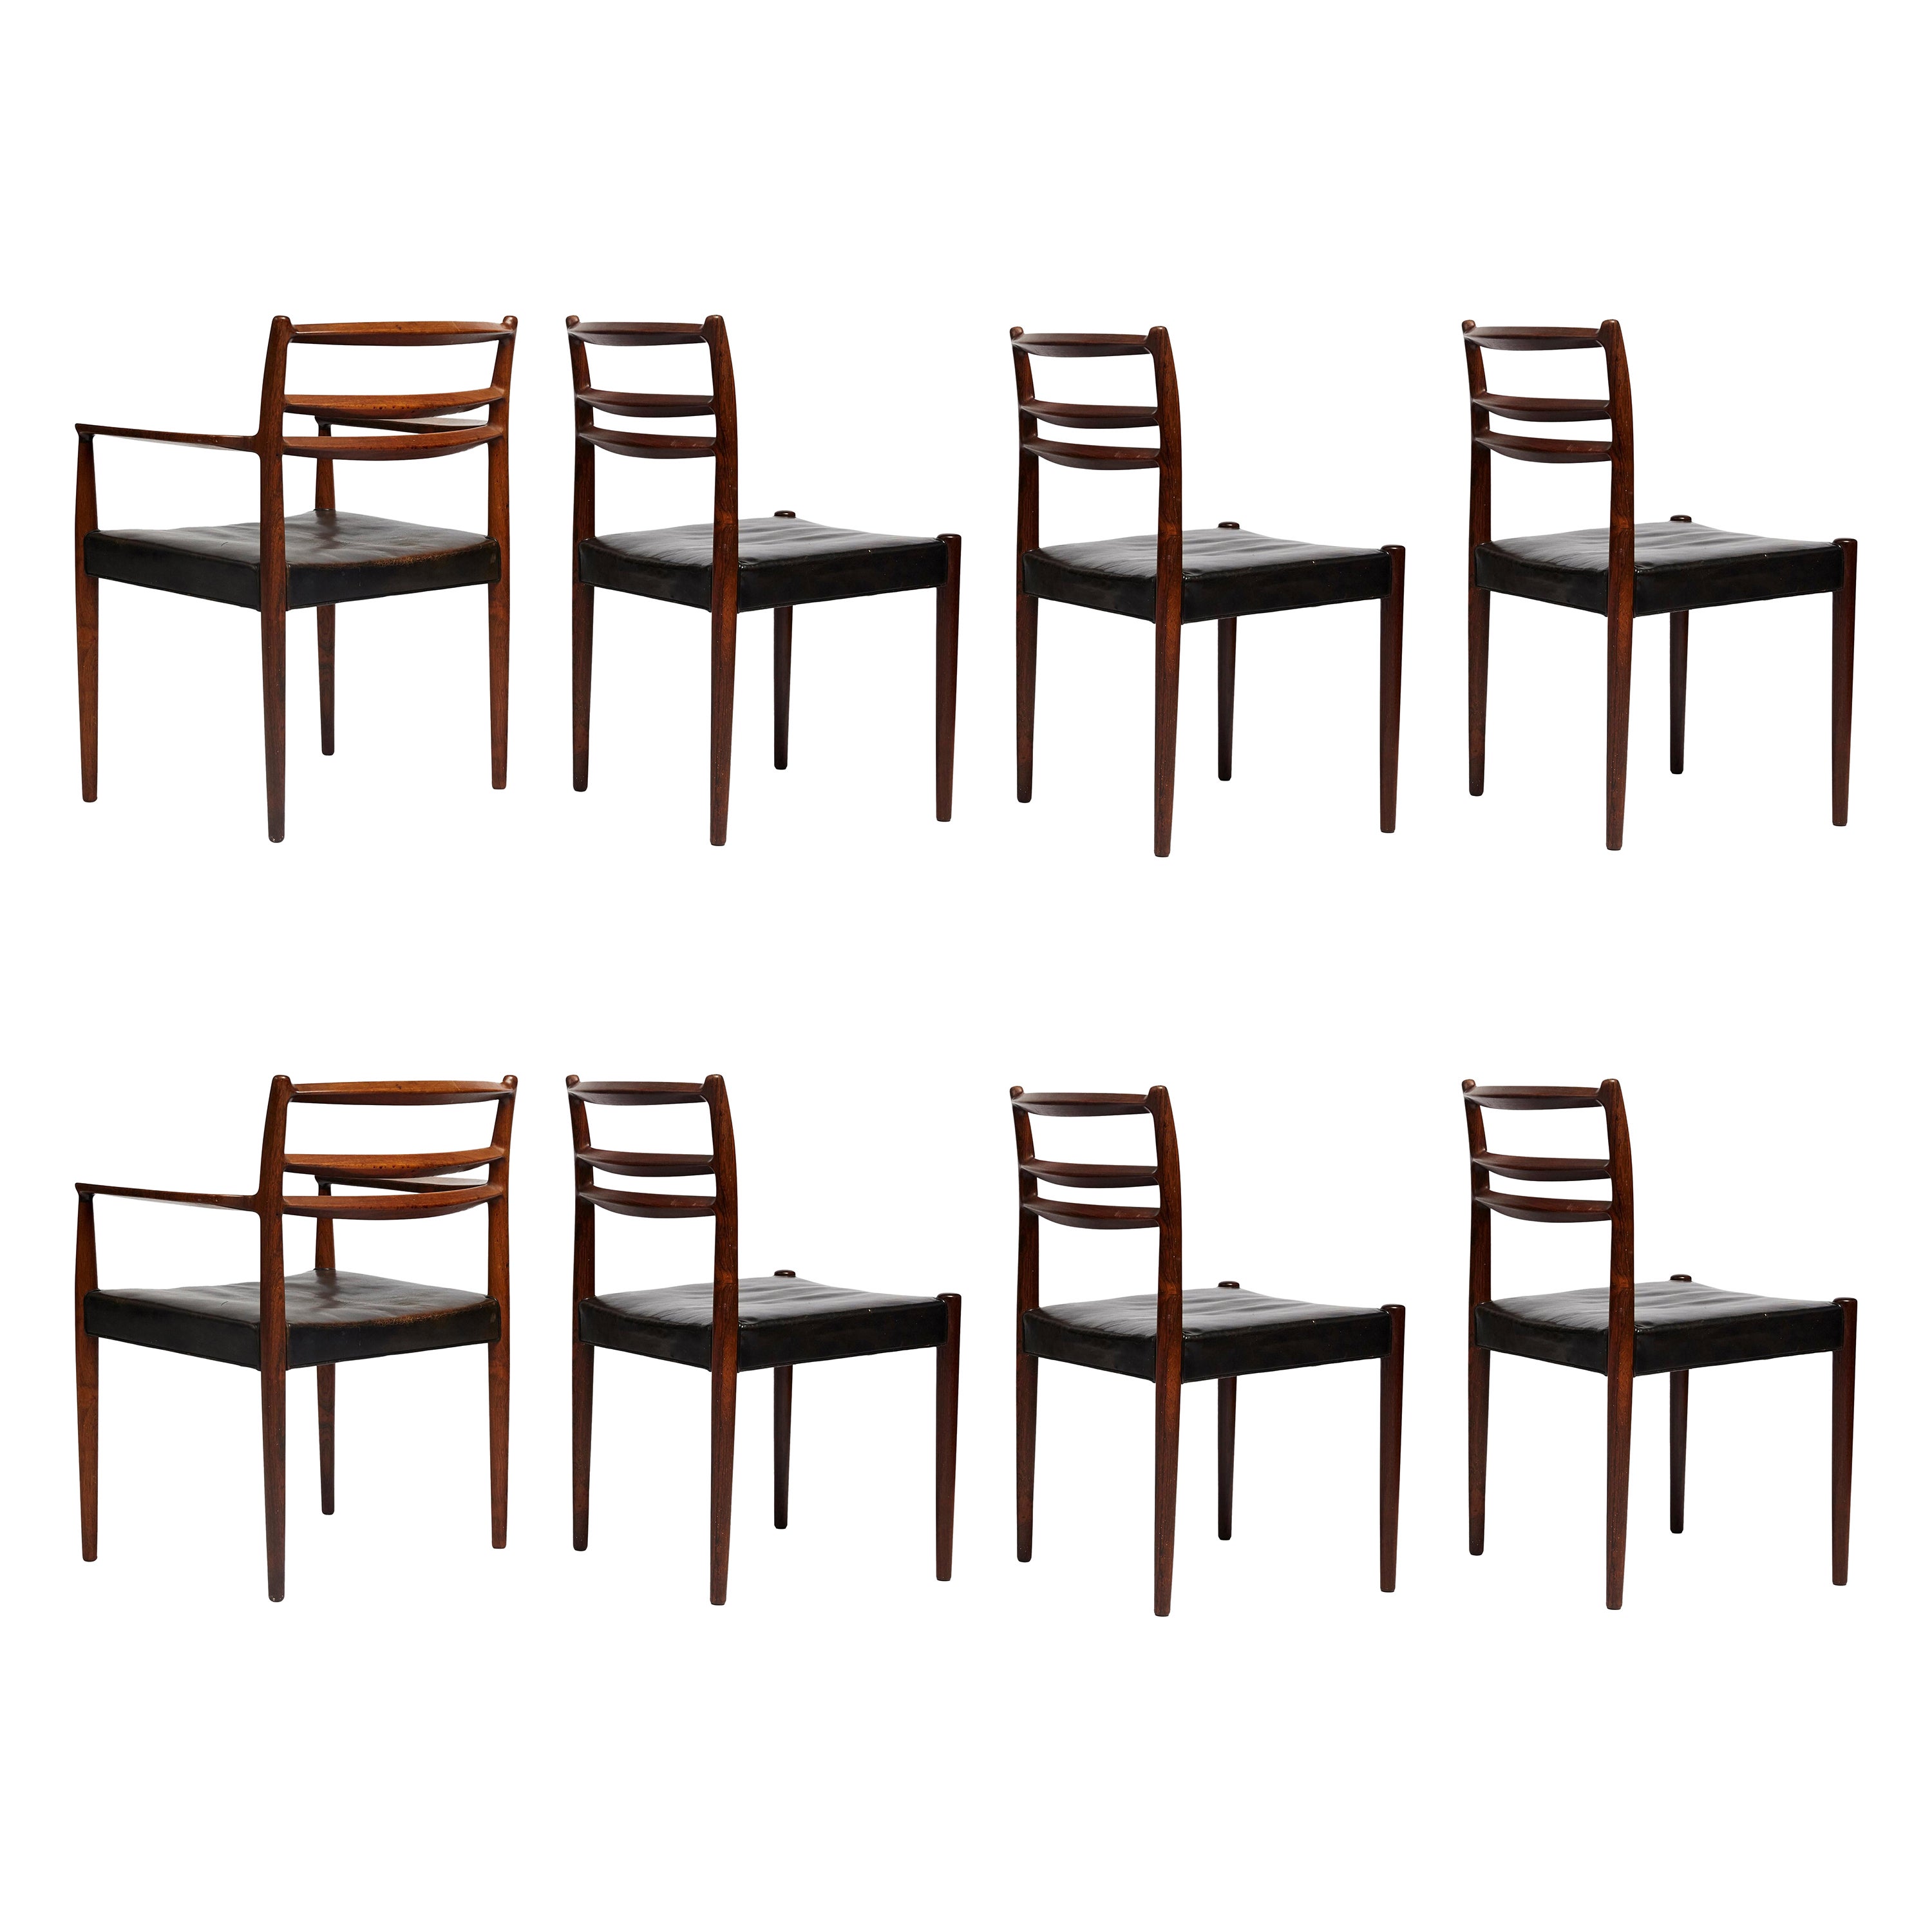 Set of 8 1960s Original Black Leather Danish Chairs with Solid Rosewood Frame